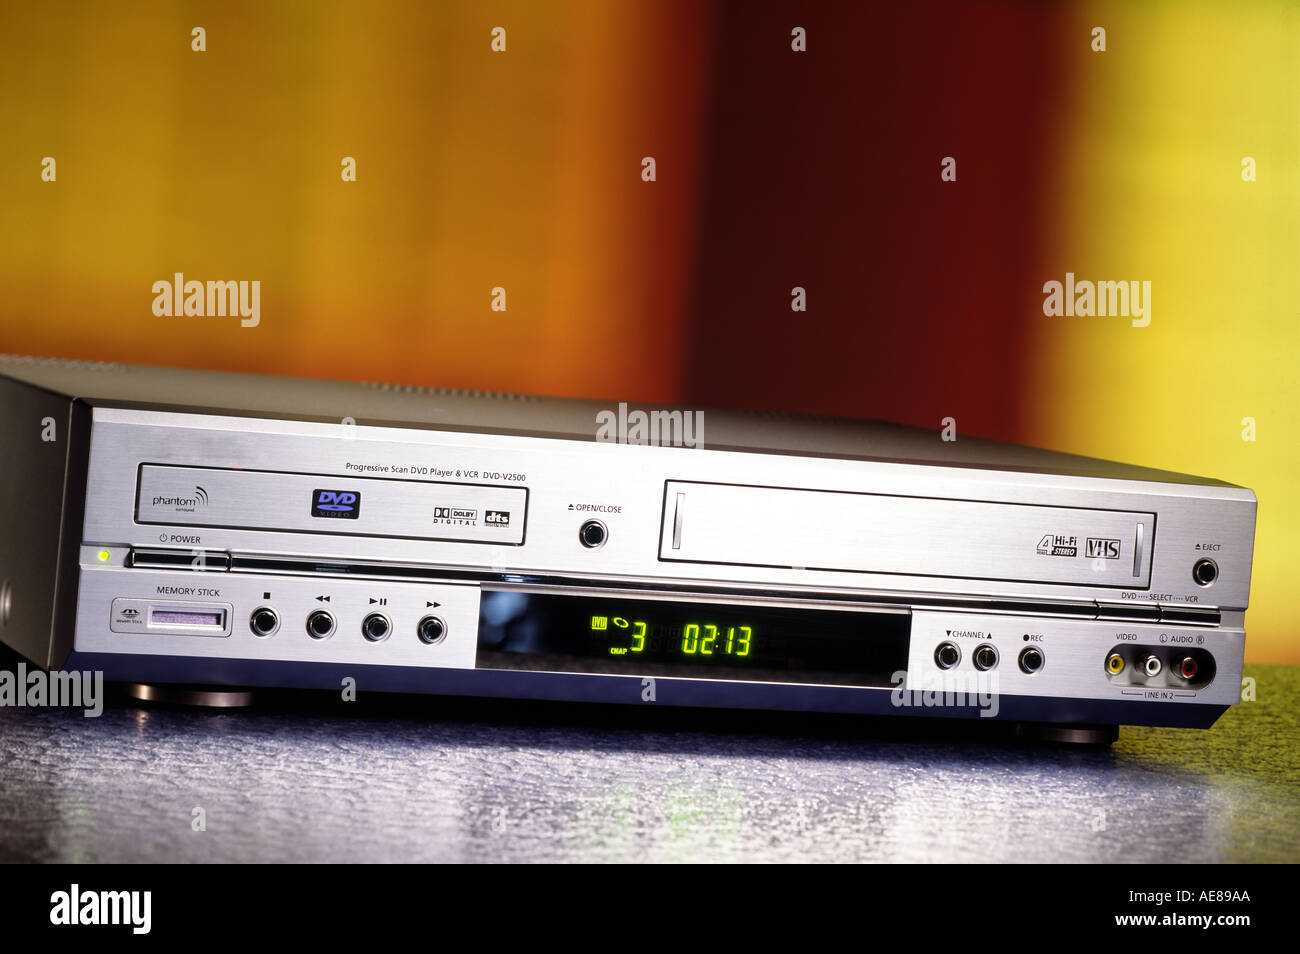 VCR DVD Player Stock Photo